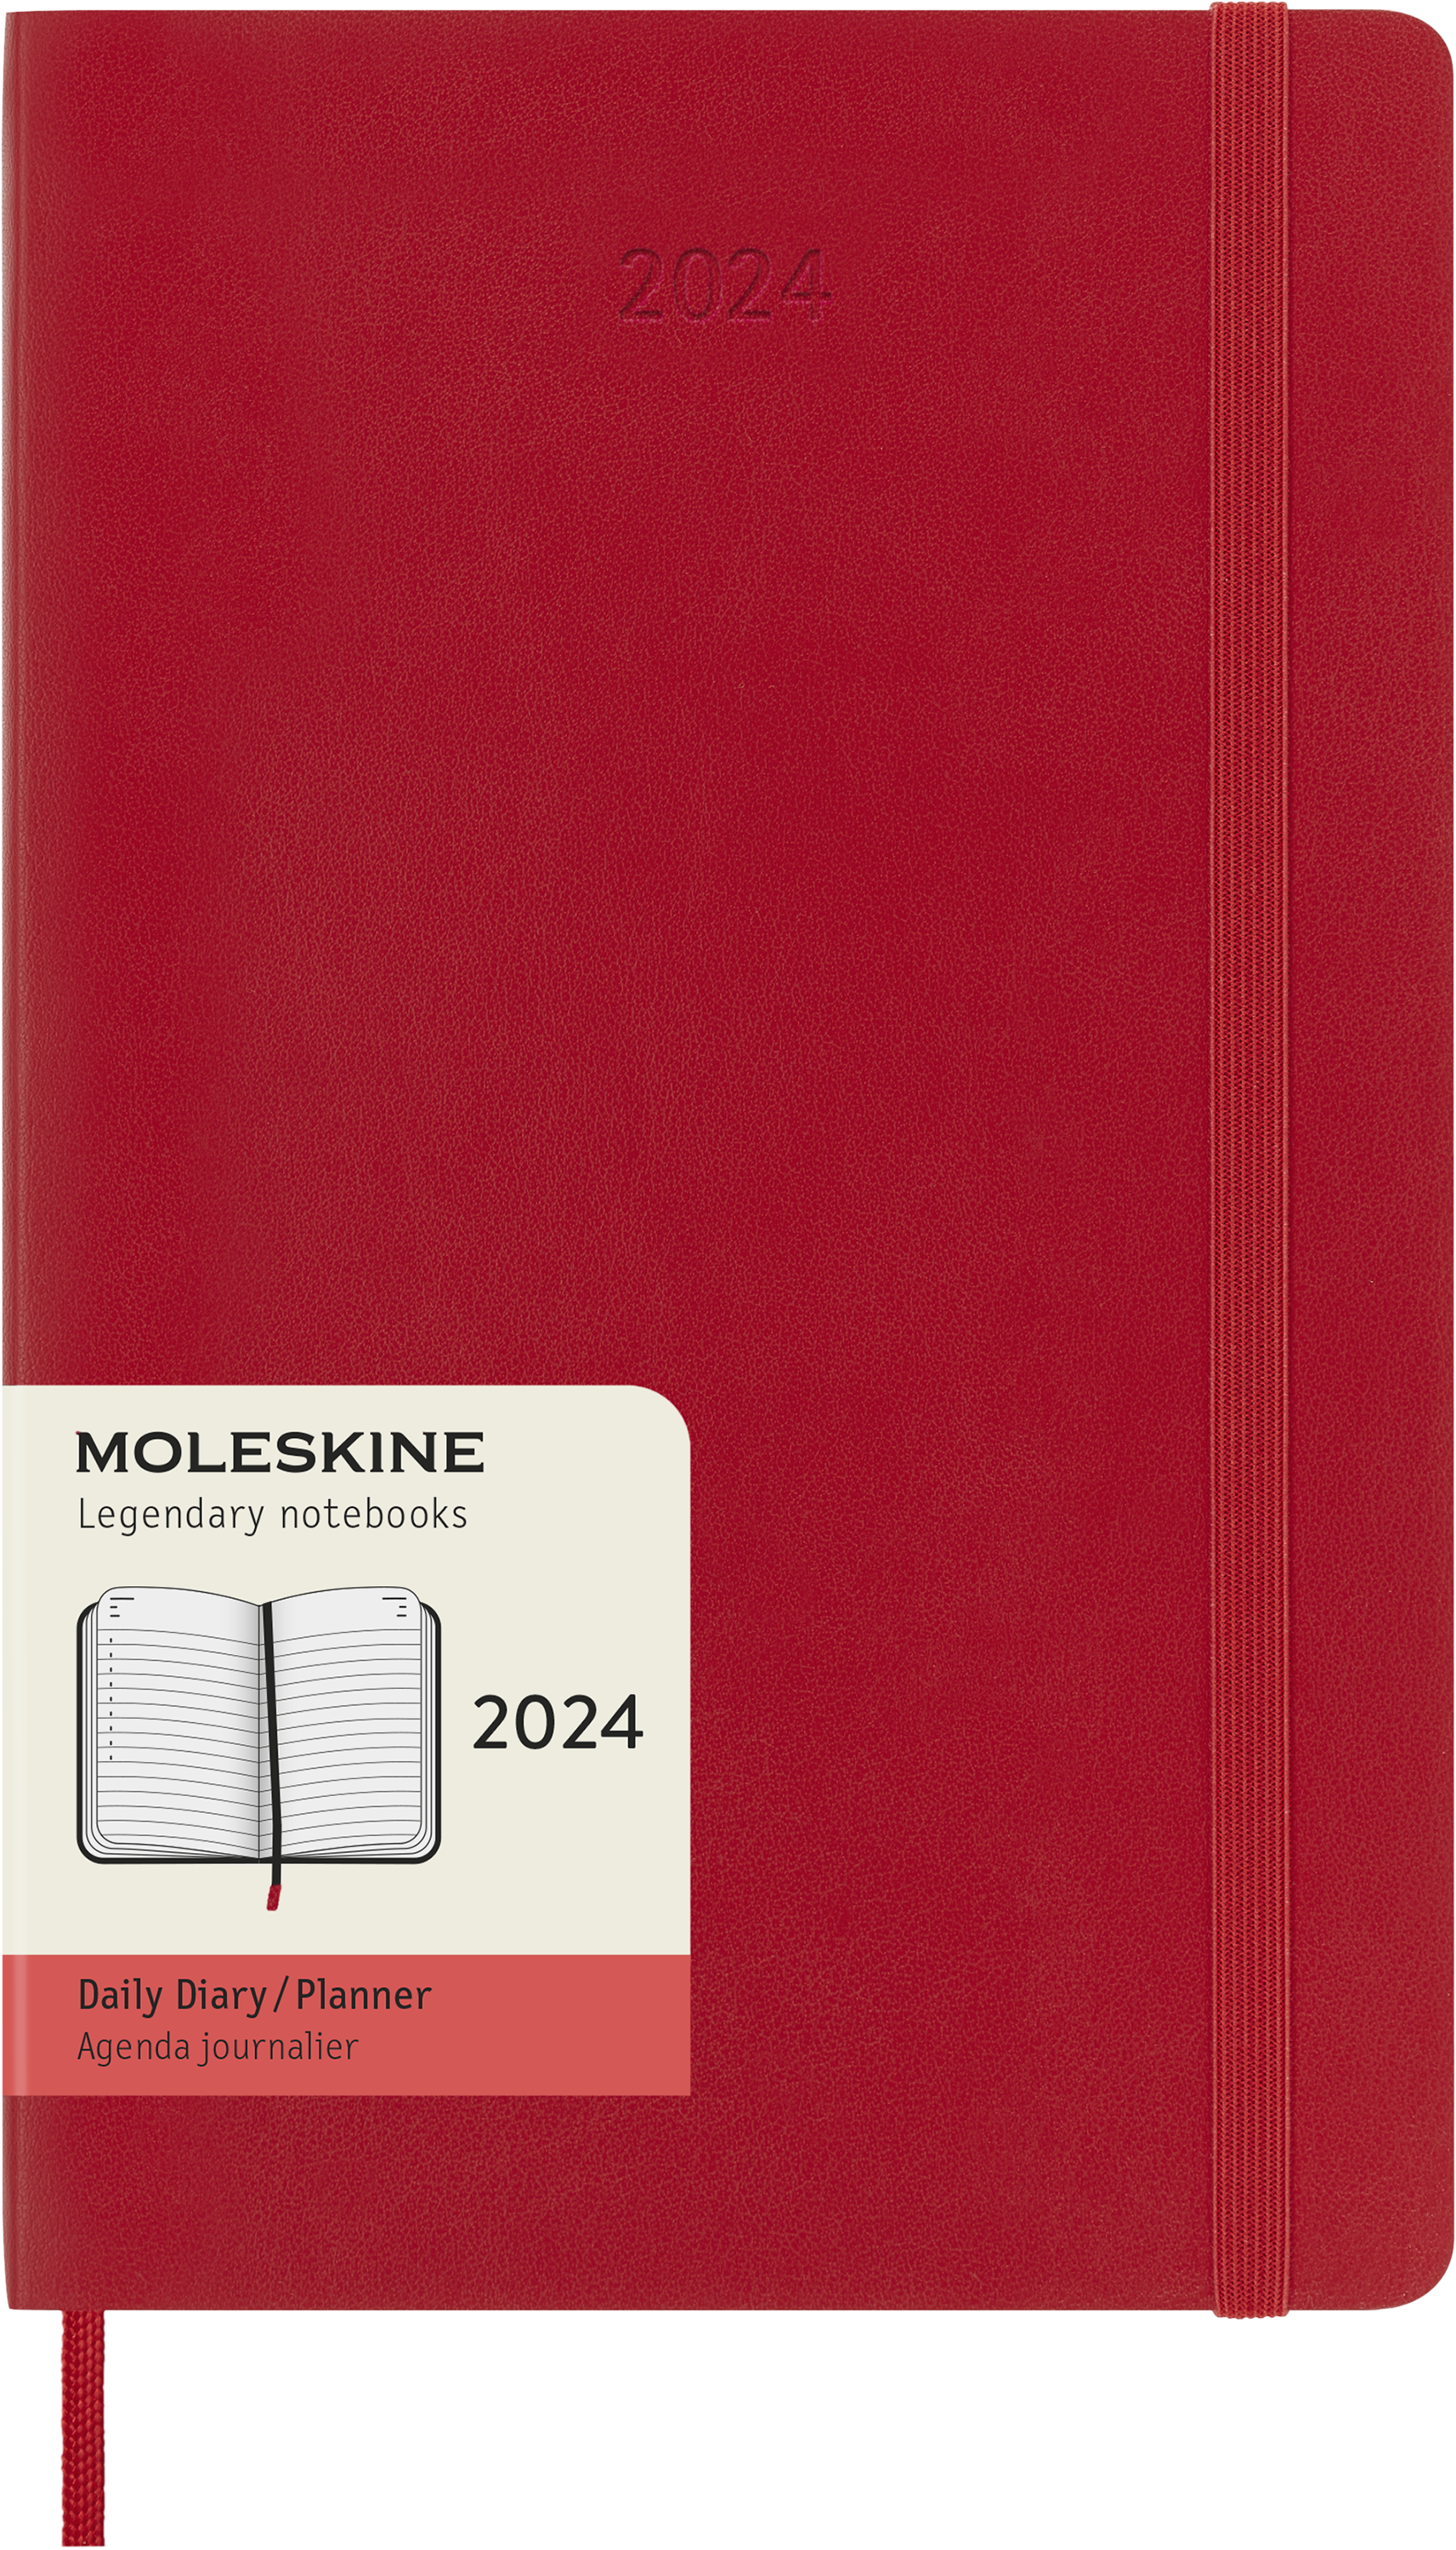 Moleskine 2024 diary softcover large day